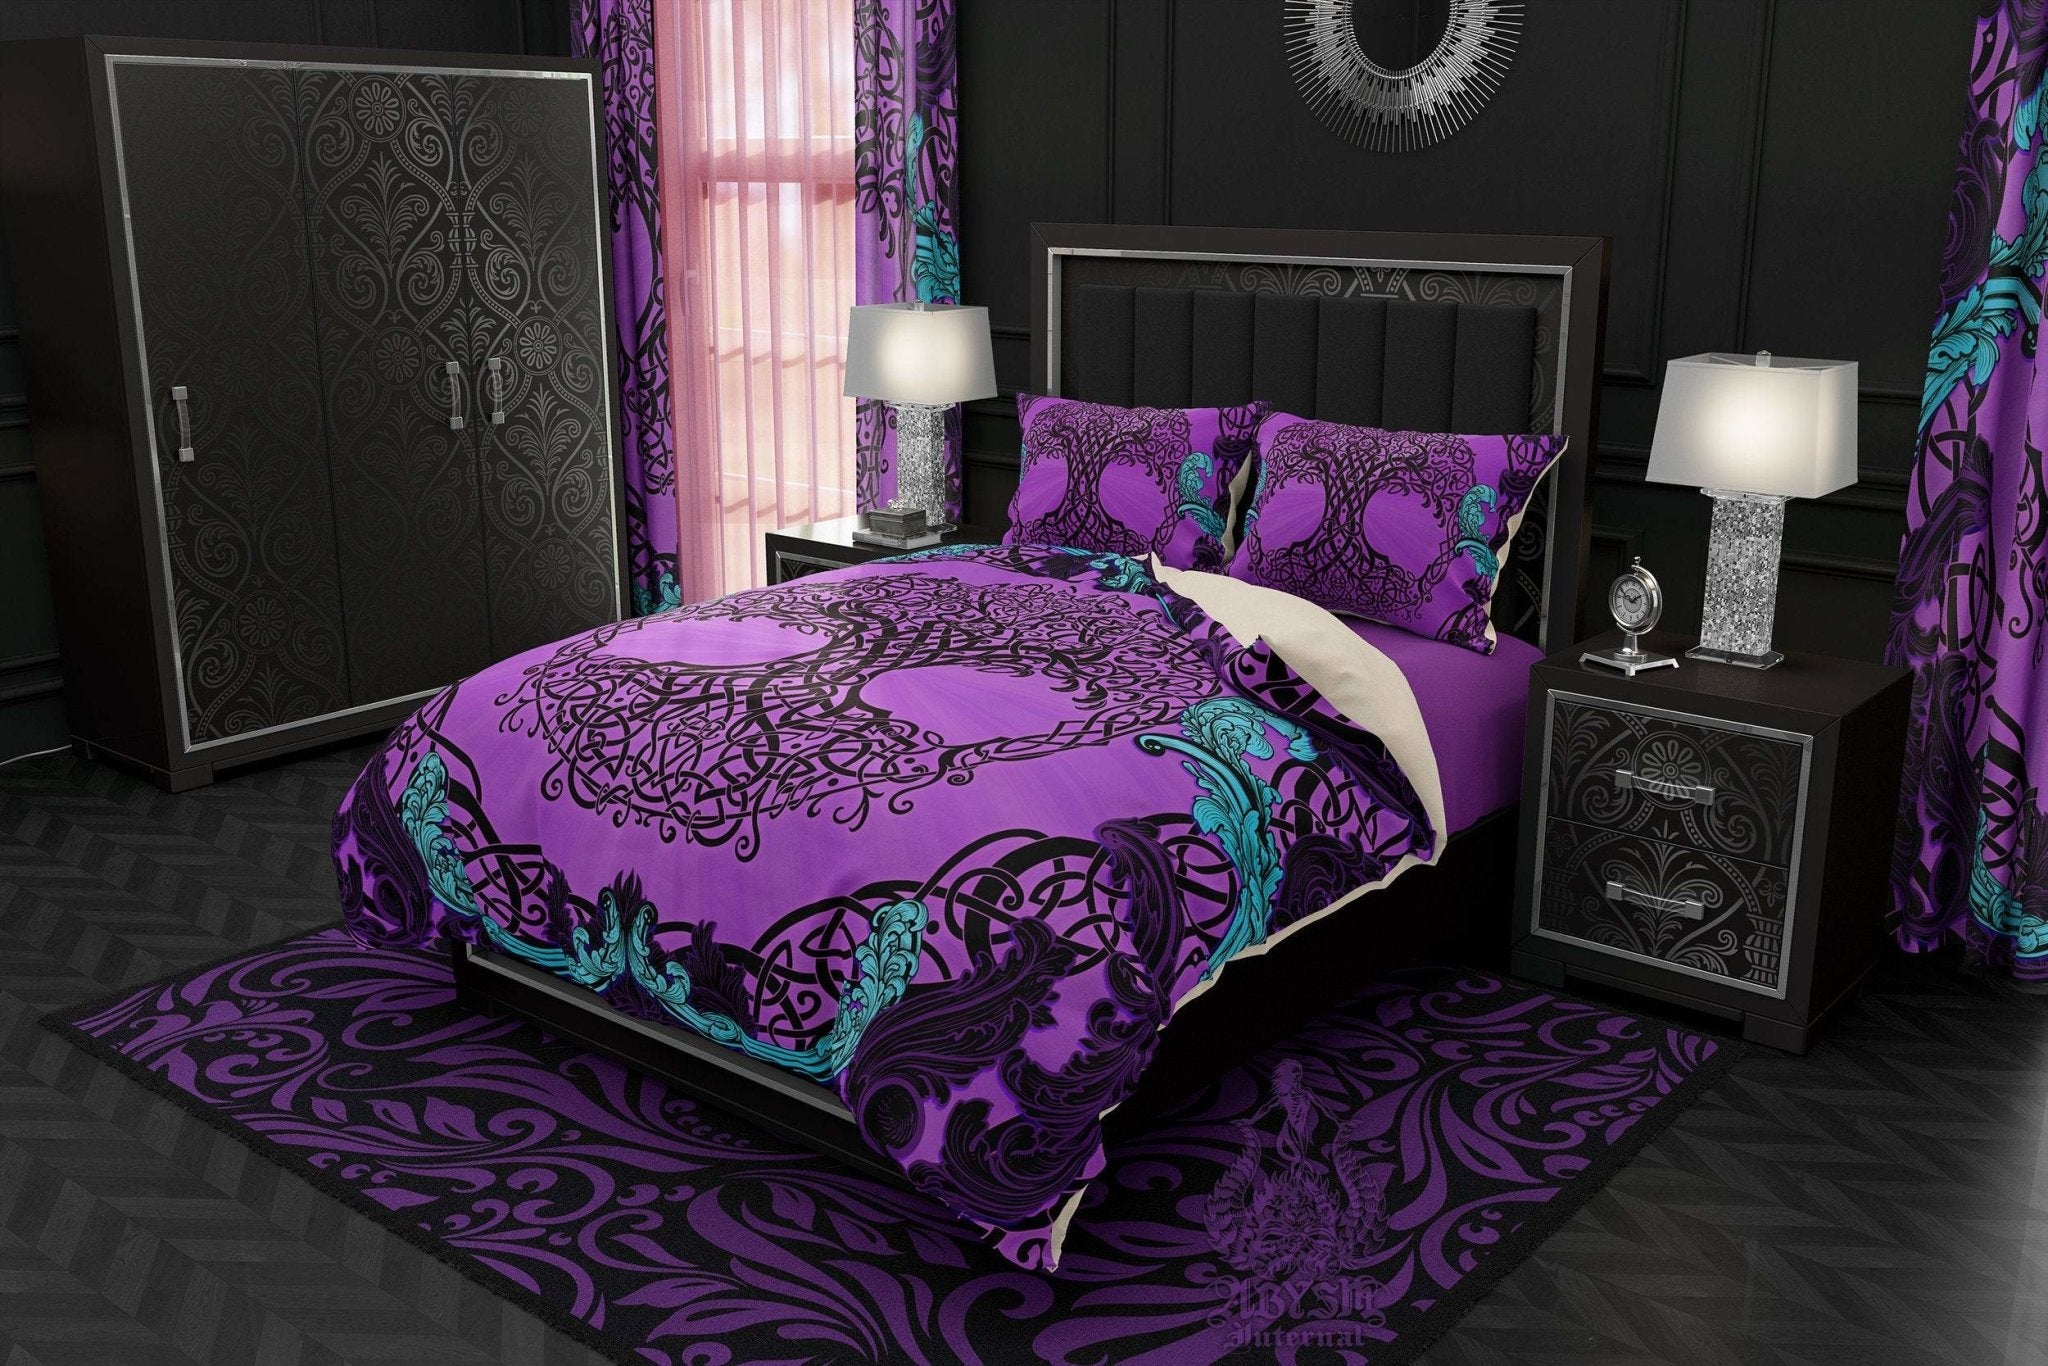 Tree of Life Bedding Set, Comforter and Duvet, Witch Bed Cover, Witchy Bedroom Decor, King, Queen and Twin Size - Celtic, Pastel Goth, Purple - Abysm Internal